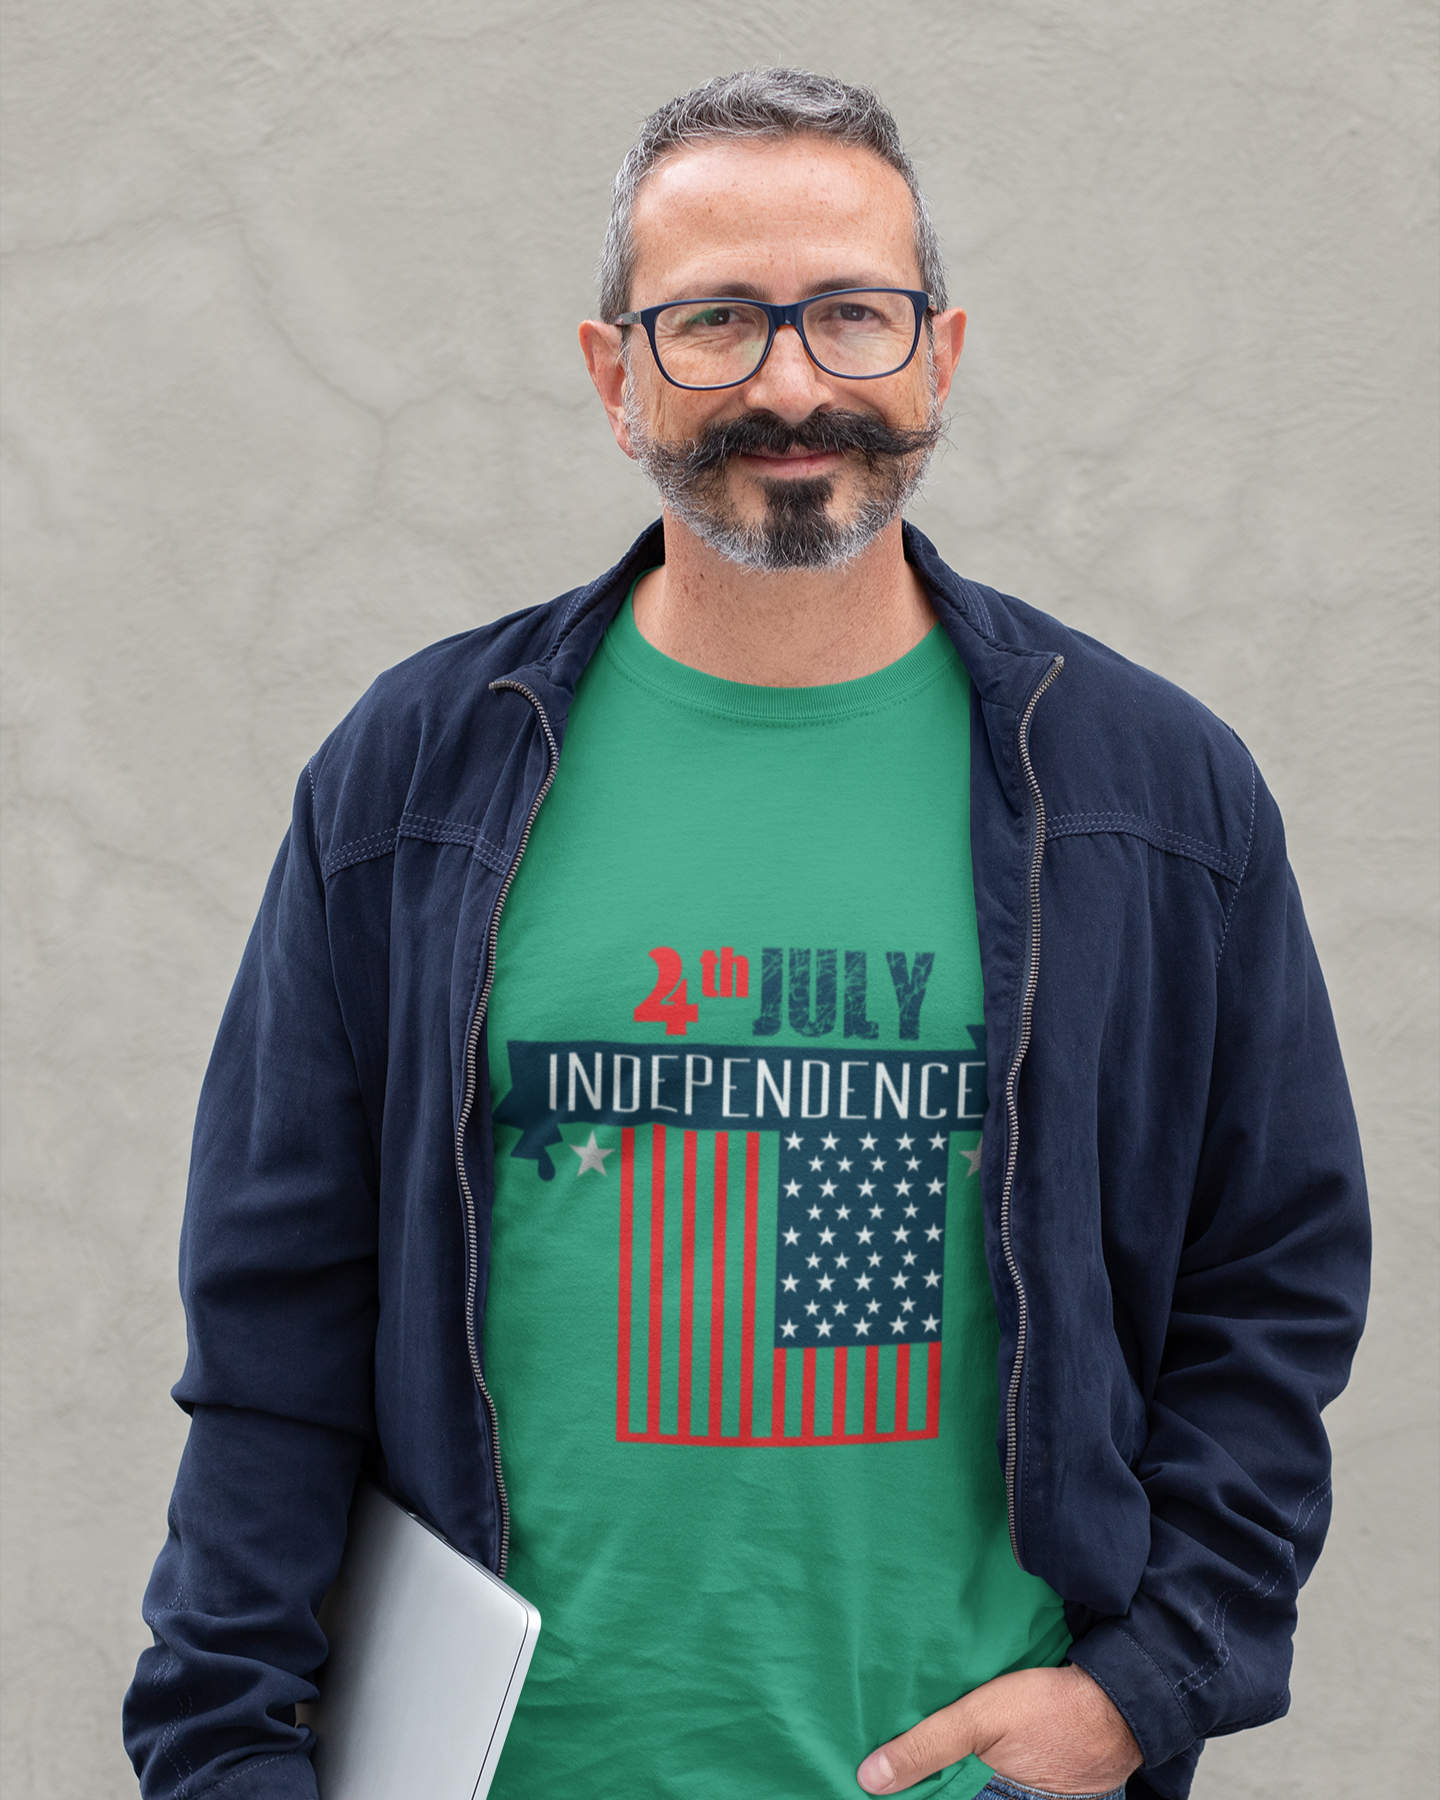 4th July Independence - Unisex T-Shirt